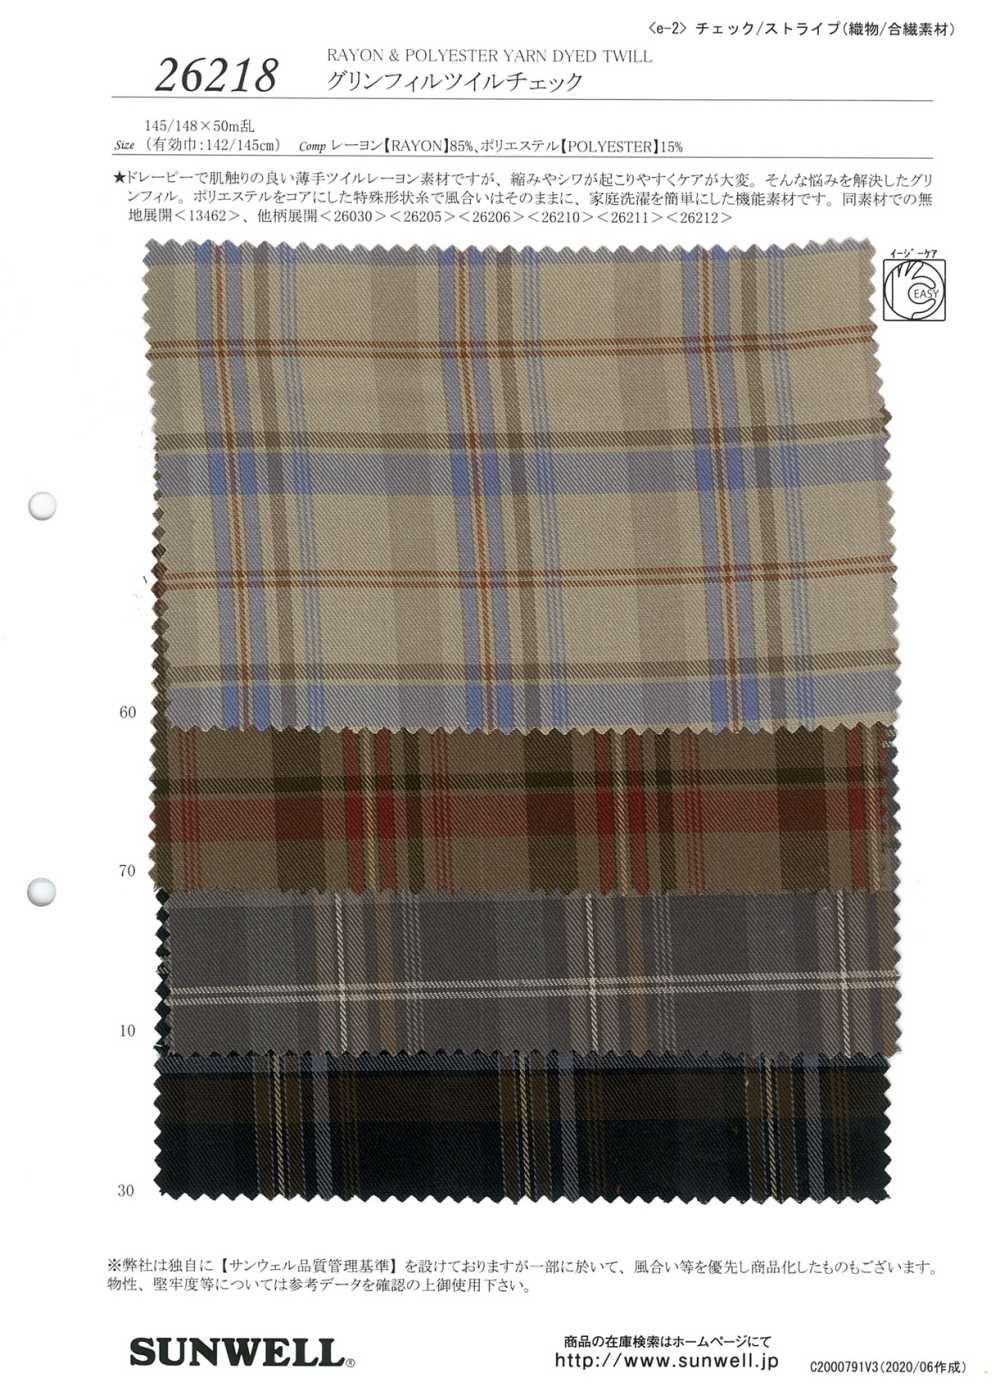 26218 [OUTLET] GrinFil Twill Check[Fabrica Textil] SUNWELL